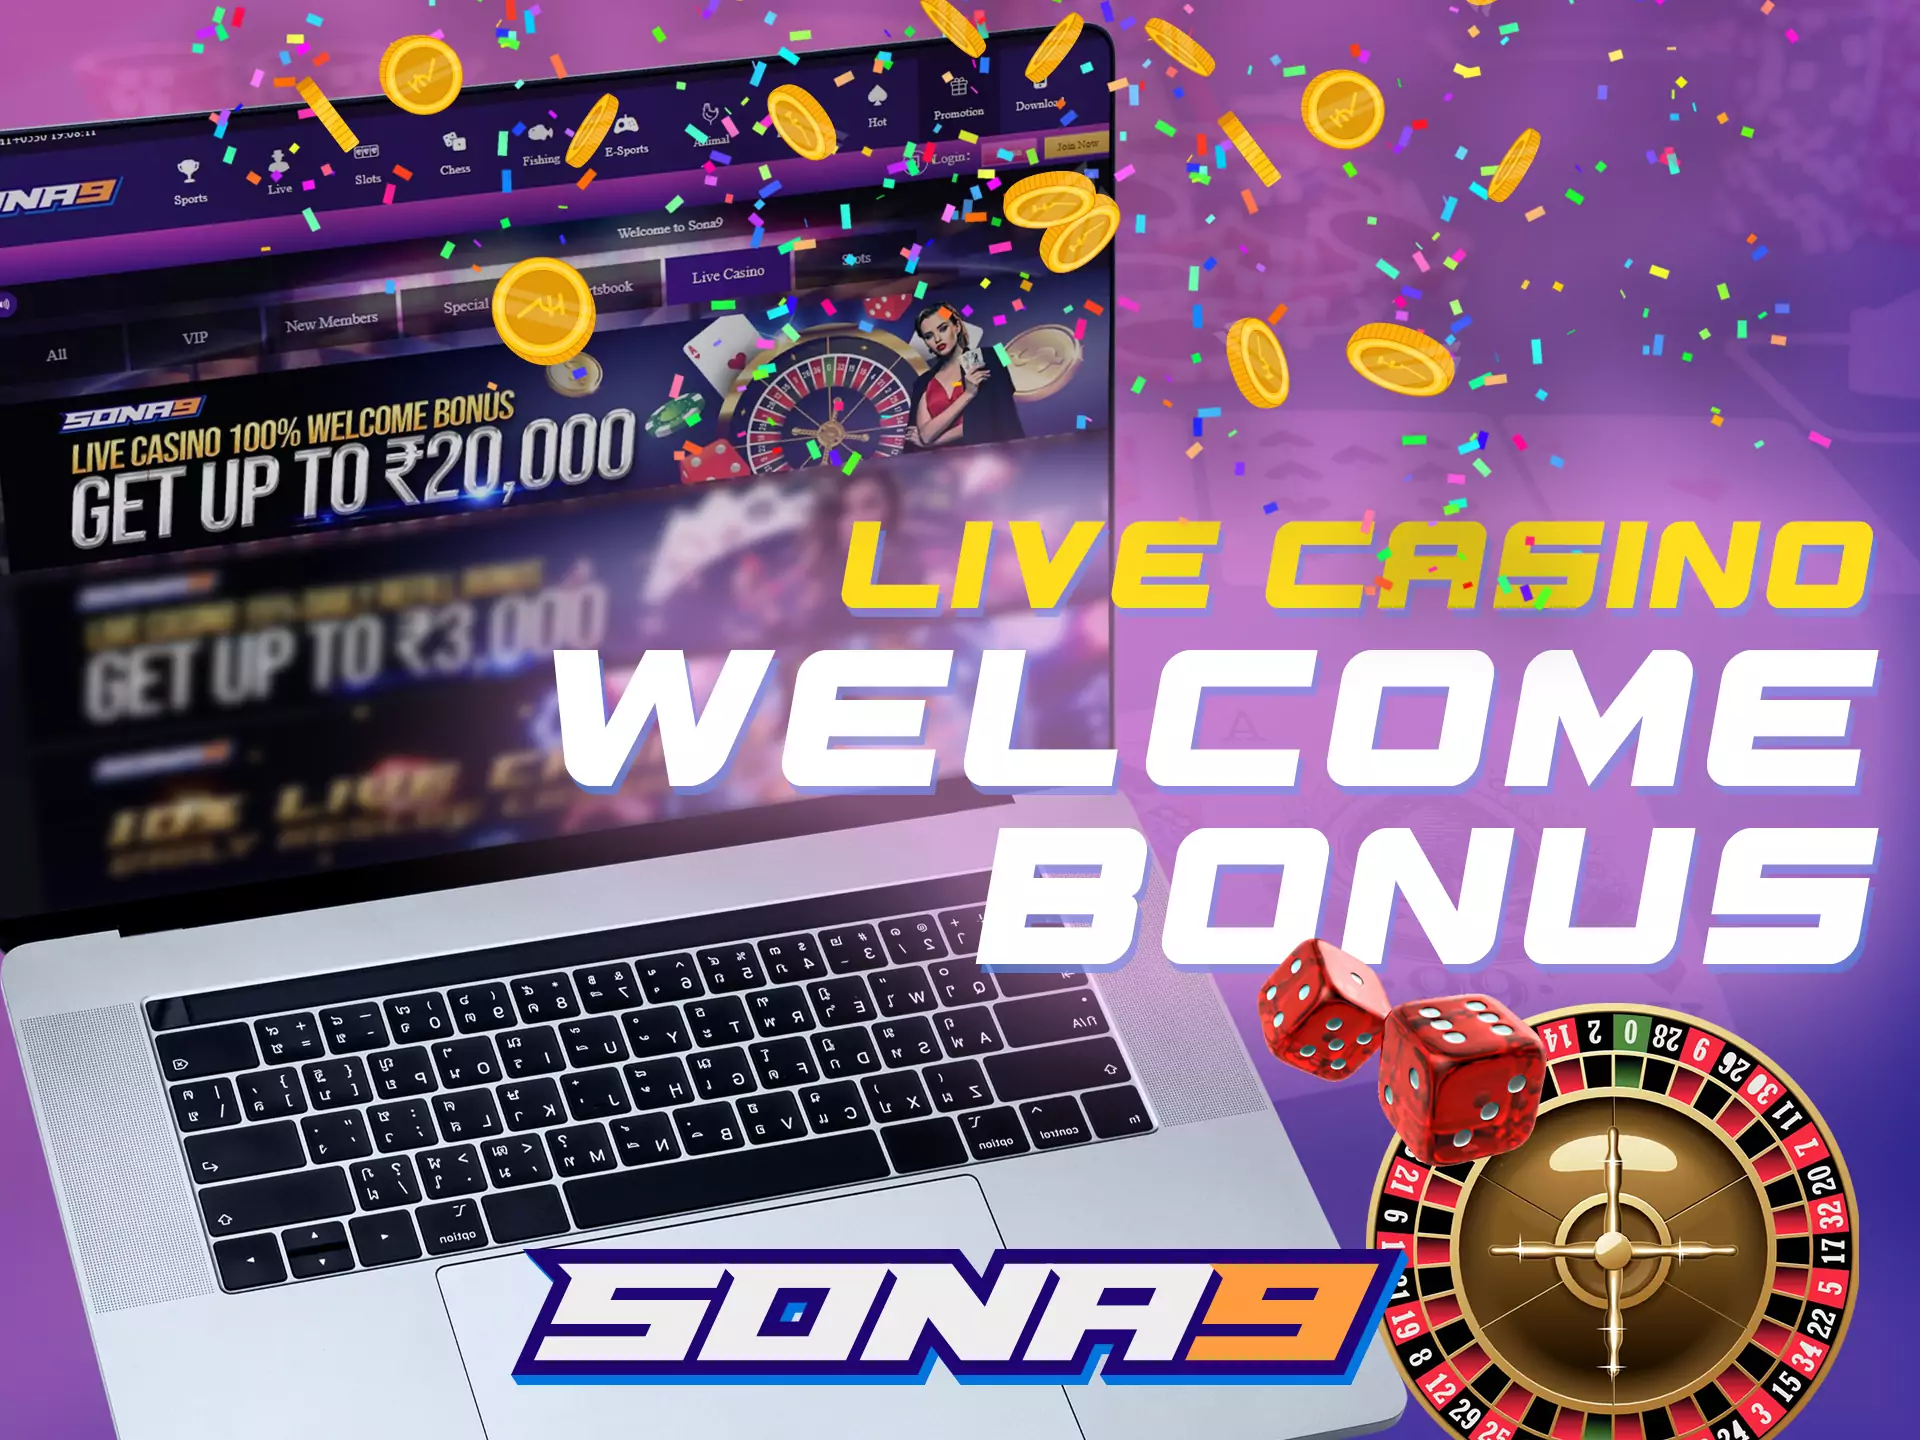 Live casino players, can get a special bonus from Sona9.